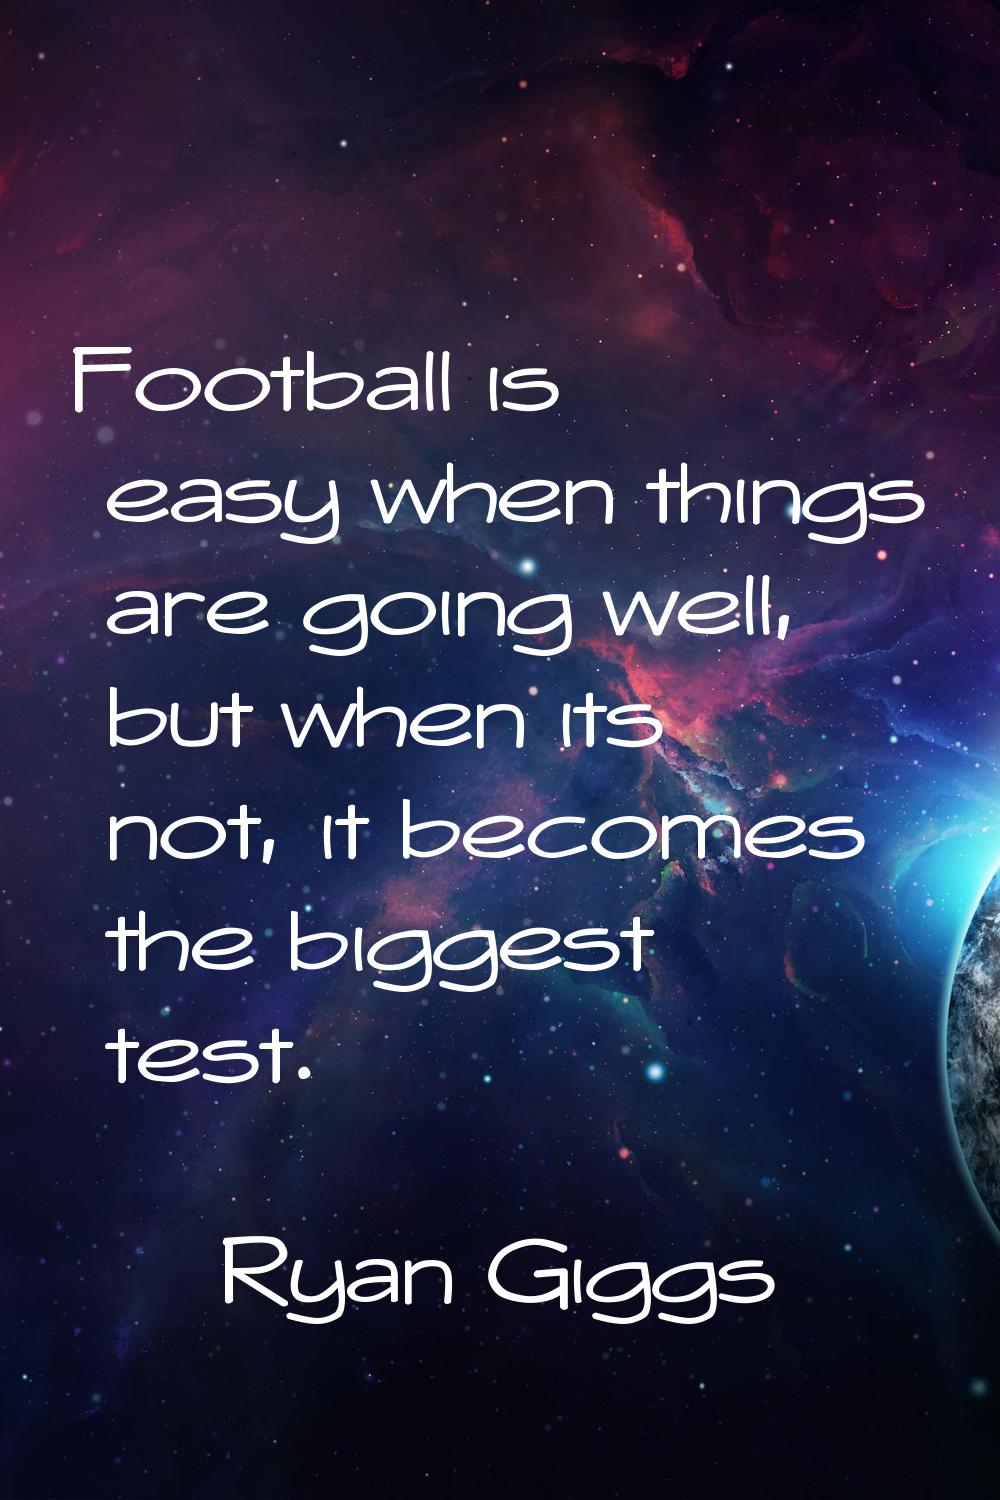 Football is easy when things are going well, but when its not, it becomes the biggest test.